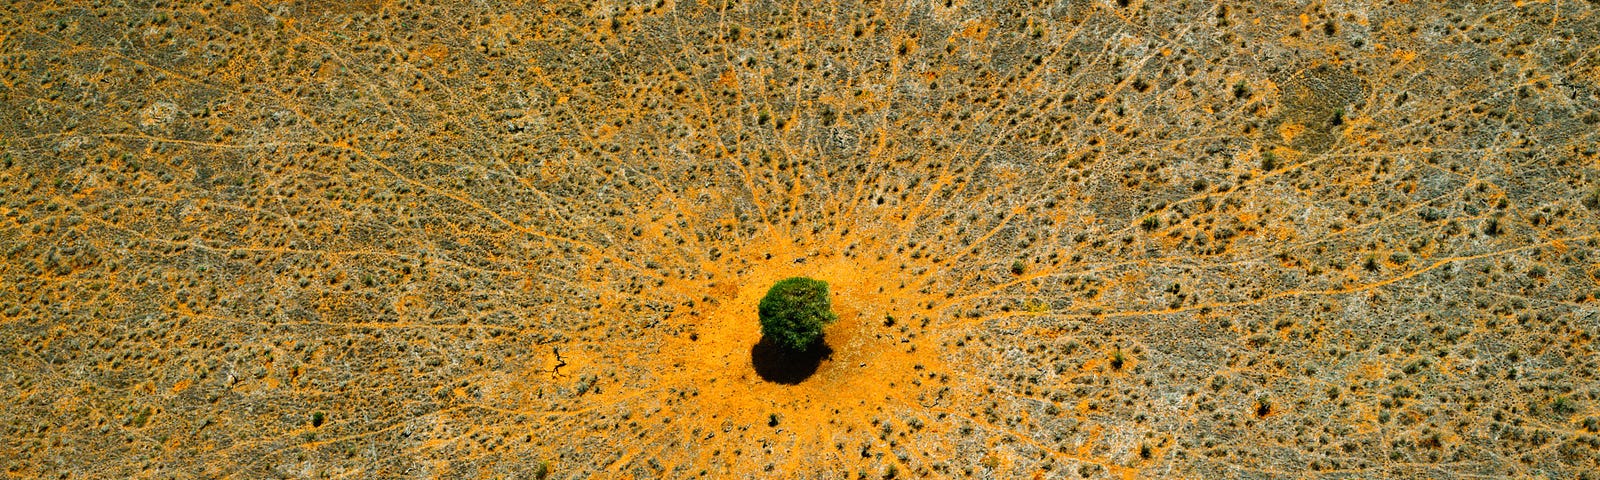 Photograph by Yann Arthus-Bertrand of an acacia in Tsavo National Park, Kenya, with many animal paths leading to and from it.